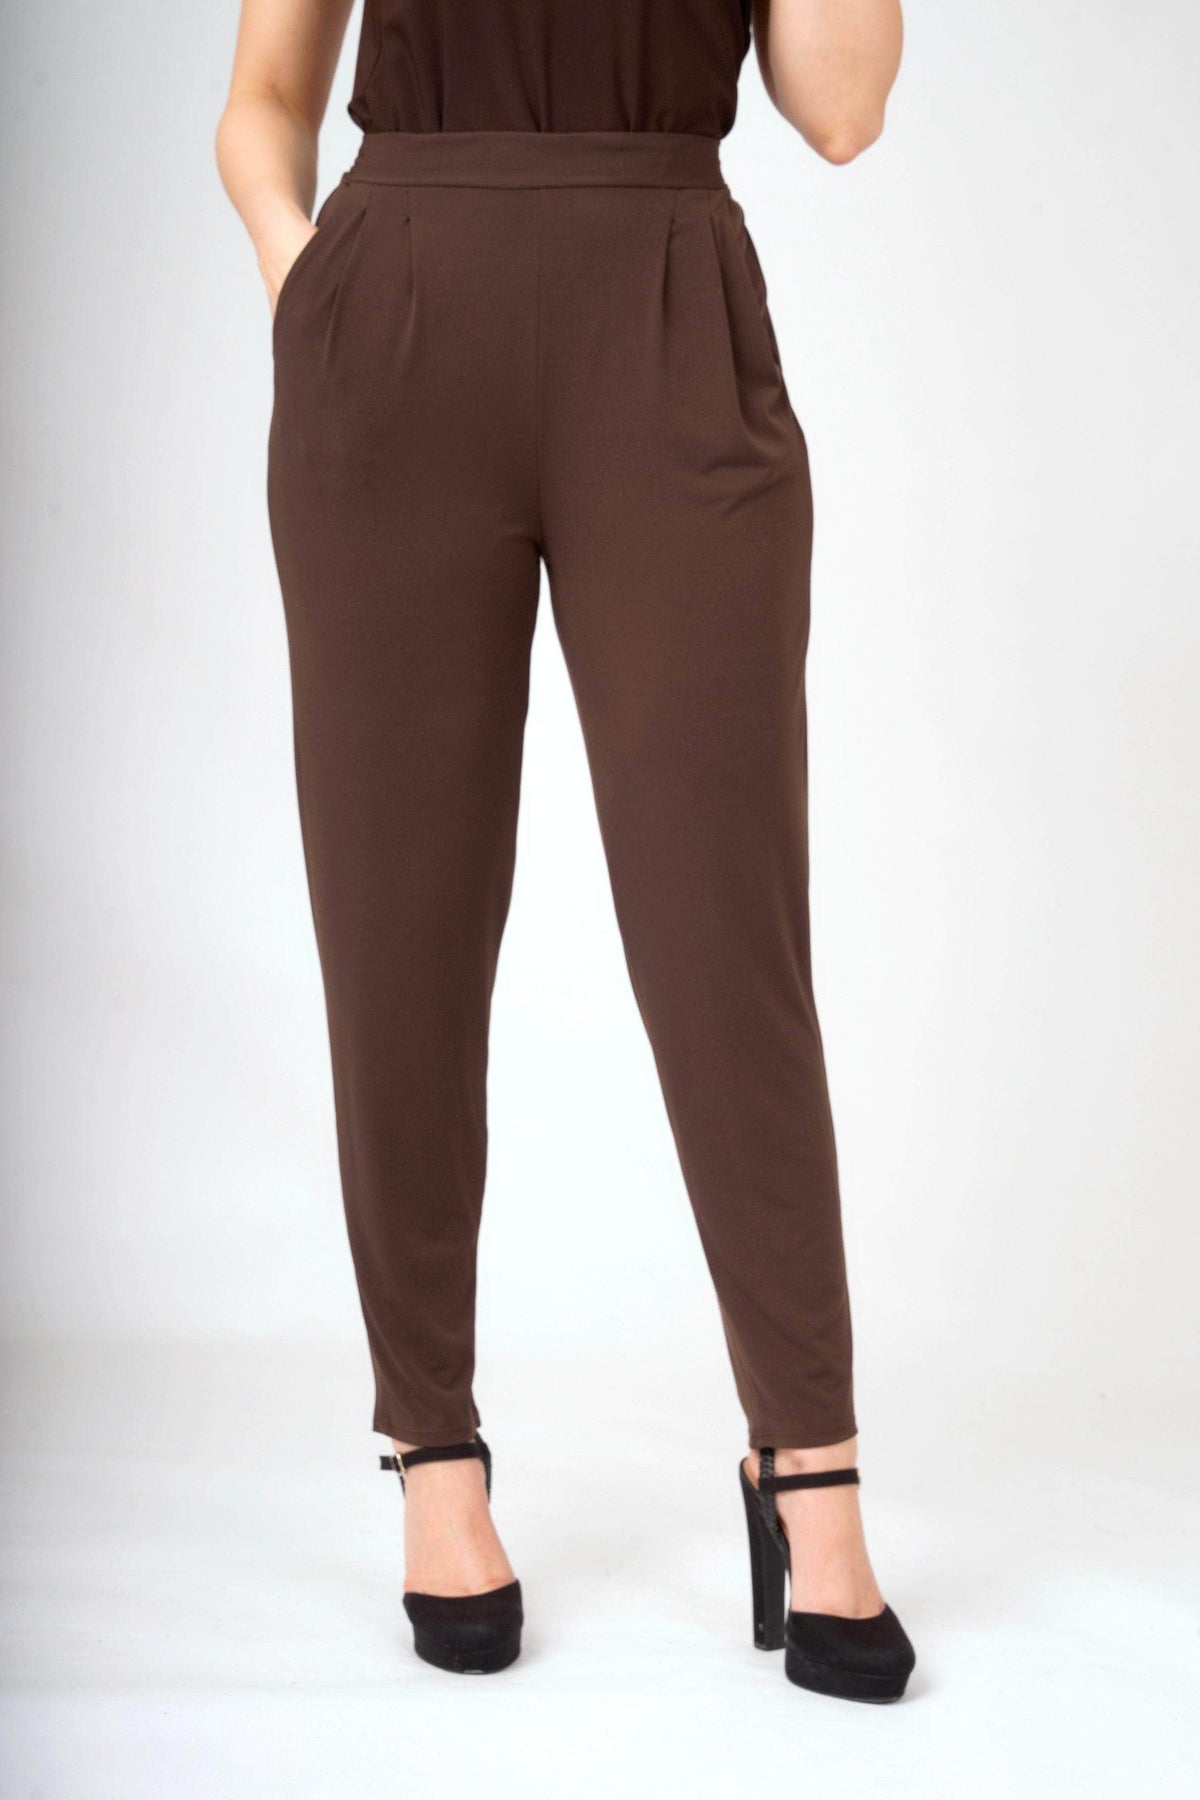 R2 Trousers Brown / UK: 12 - EU: 38 - US: S Essential Tapered Trousers with Pockets